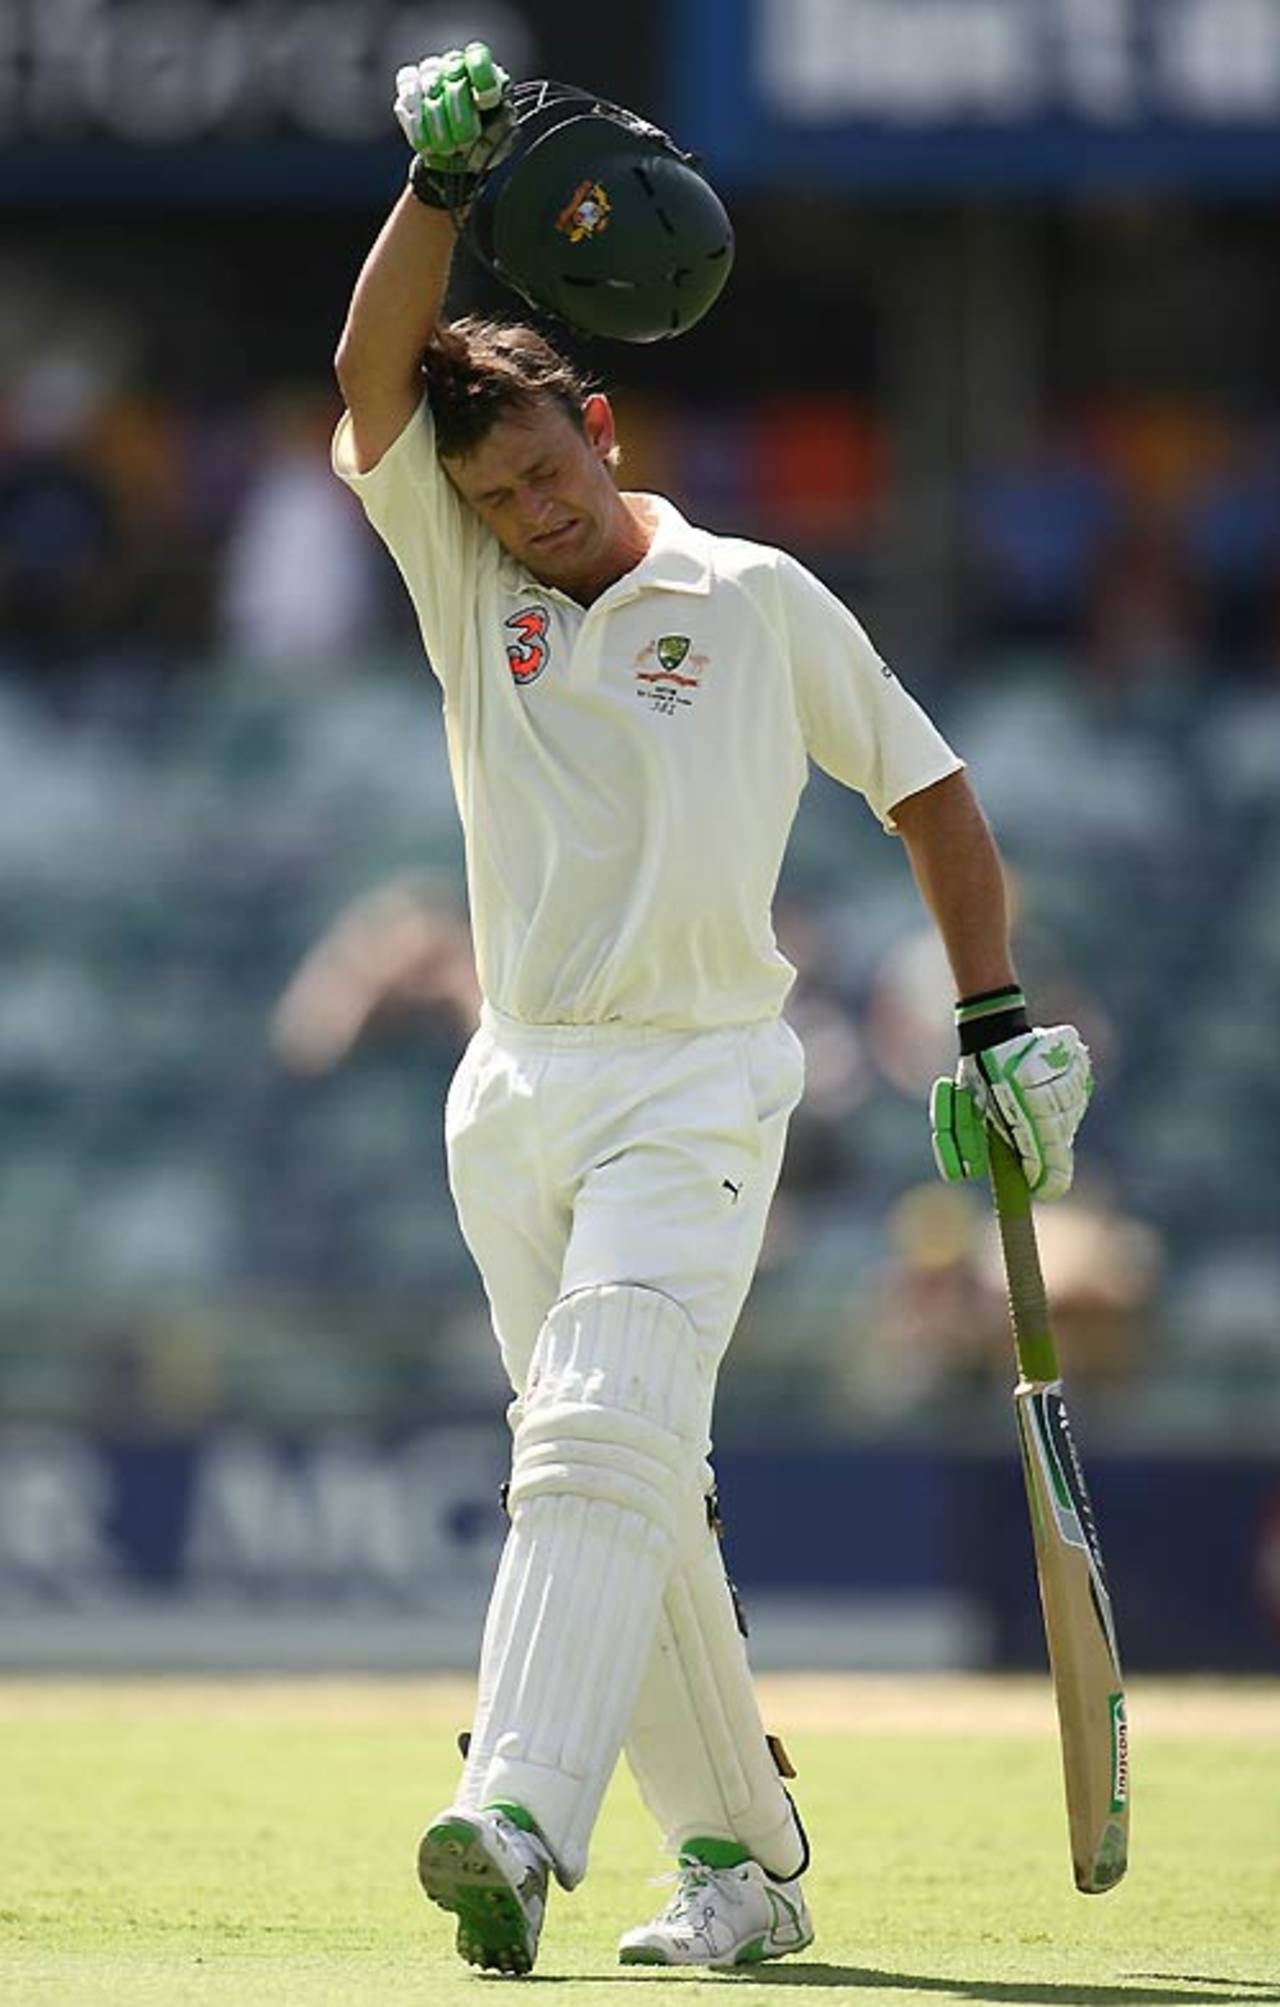 A disappointed Adam Gilchrist walks back, Australia v India, 3rd Test, Perth, 2nd day, January 17, 2008 